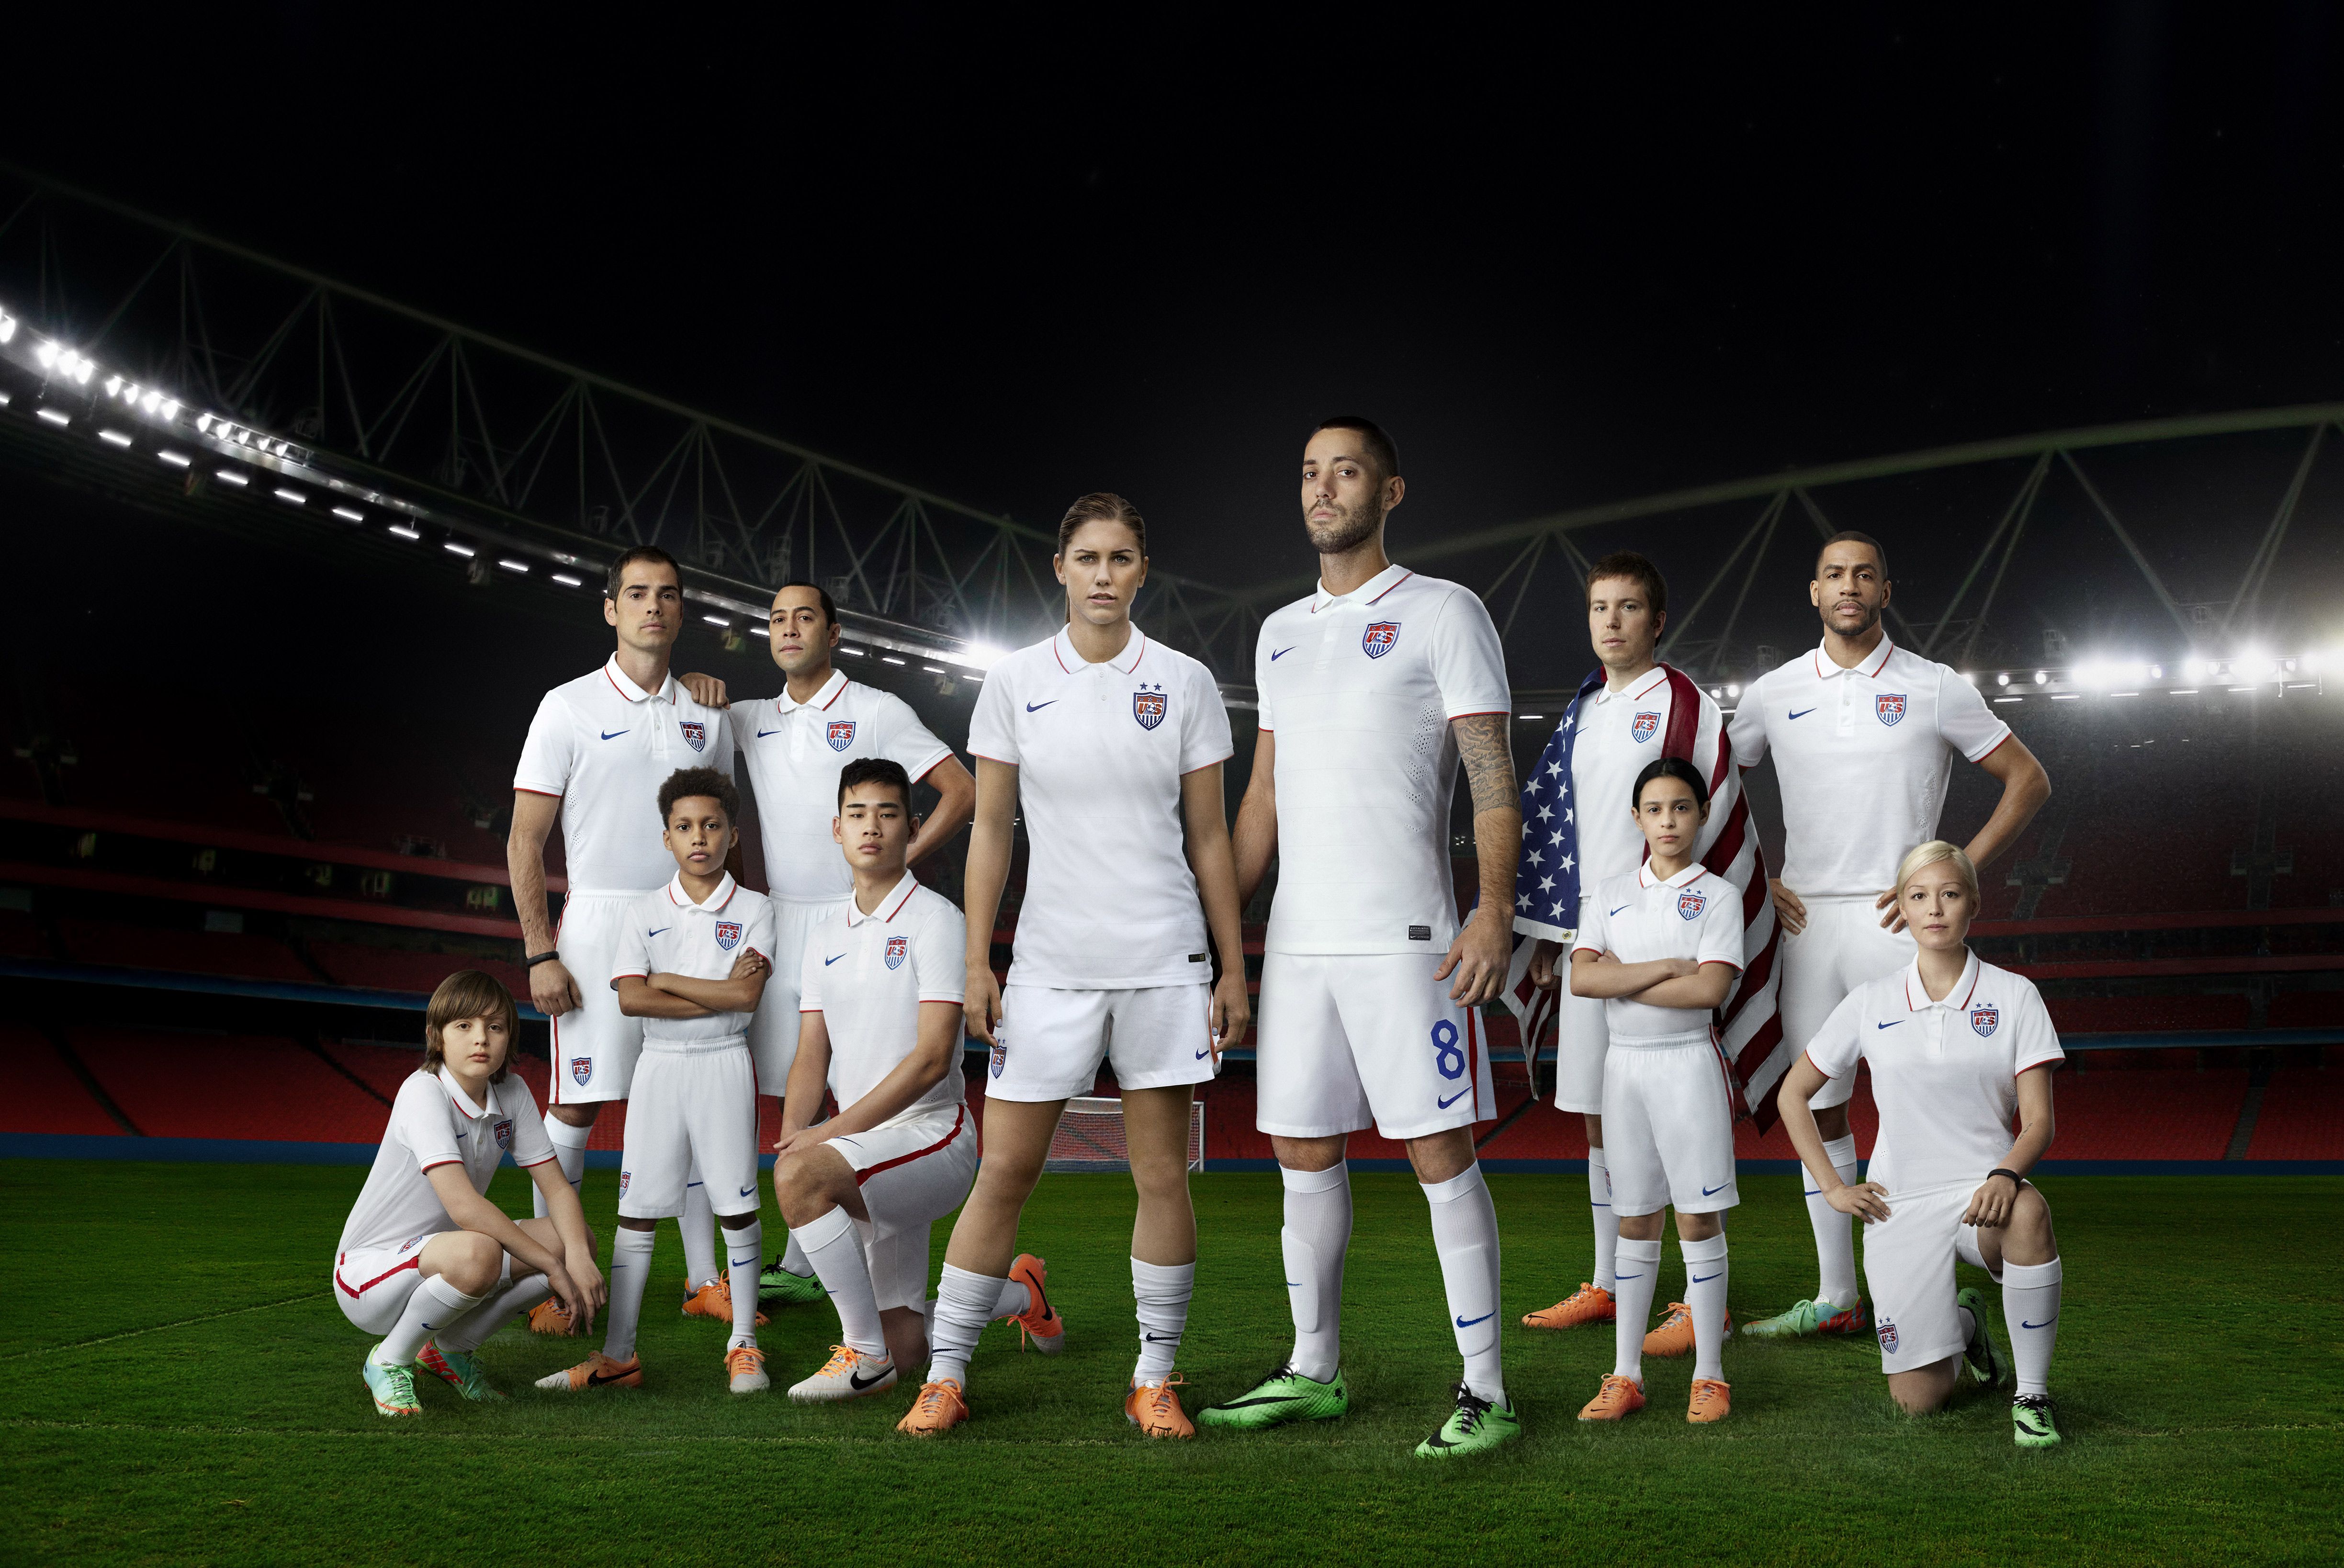 U.S. Unveils 2014 National Team Kit with Nike Soccer